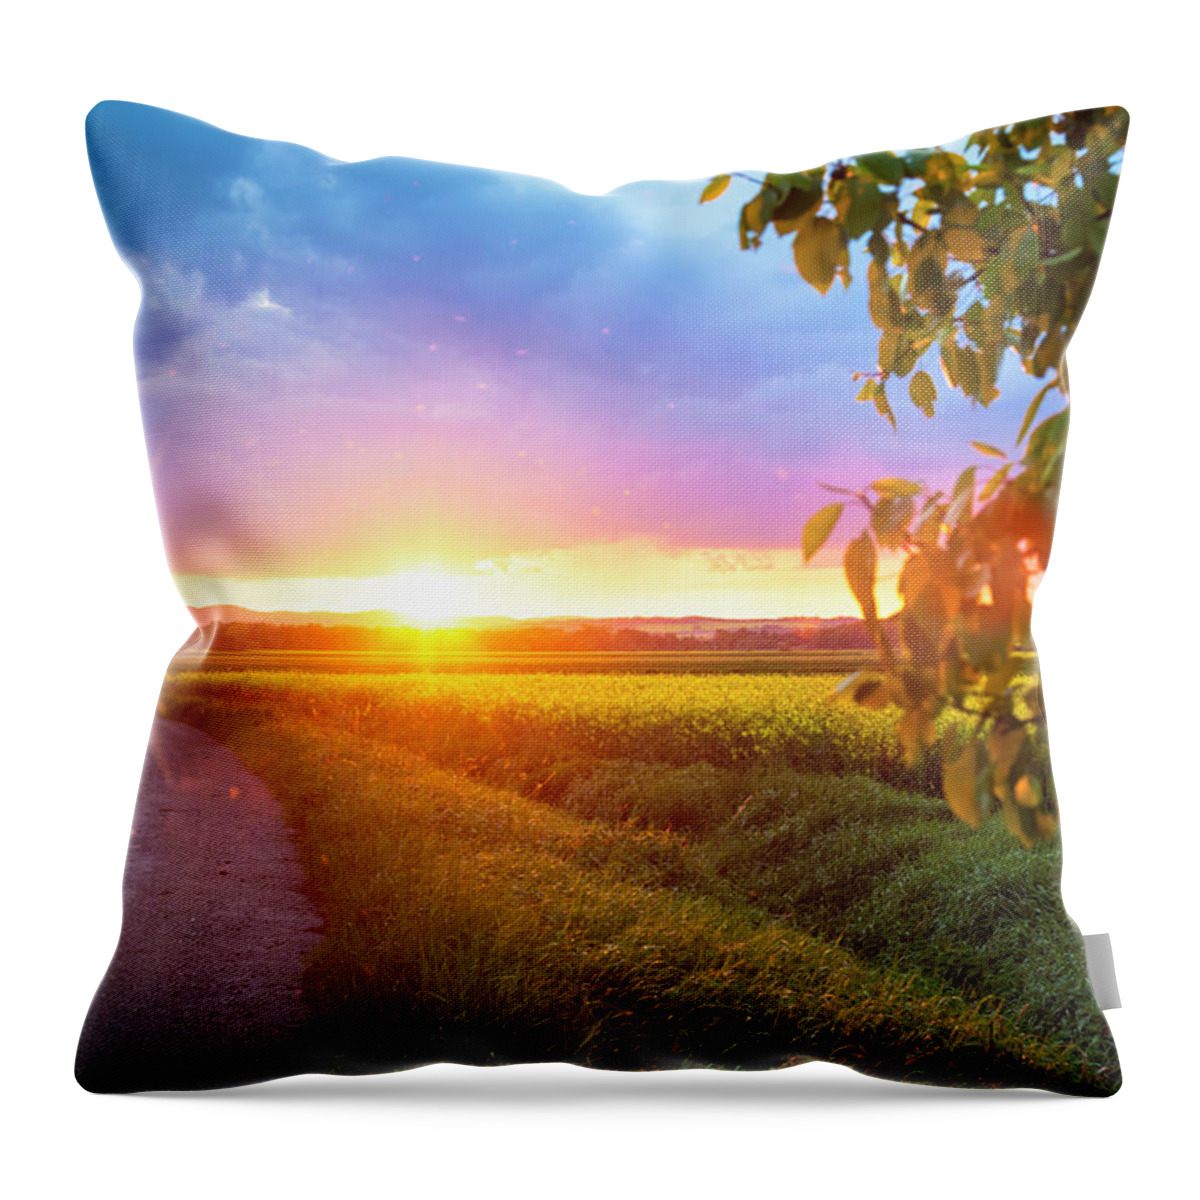 Scenics Throw Pillow featuring the photograph Beautiful Sunset by Brzozowska